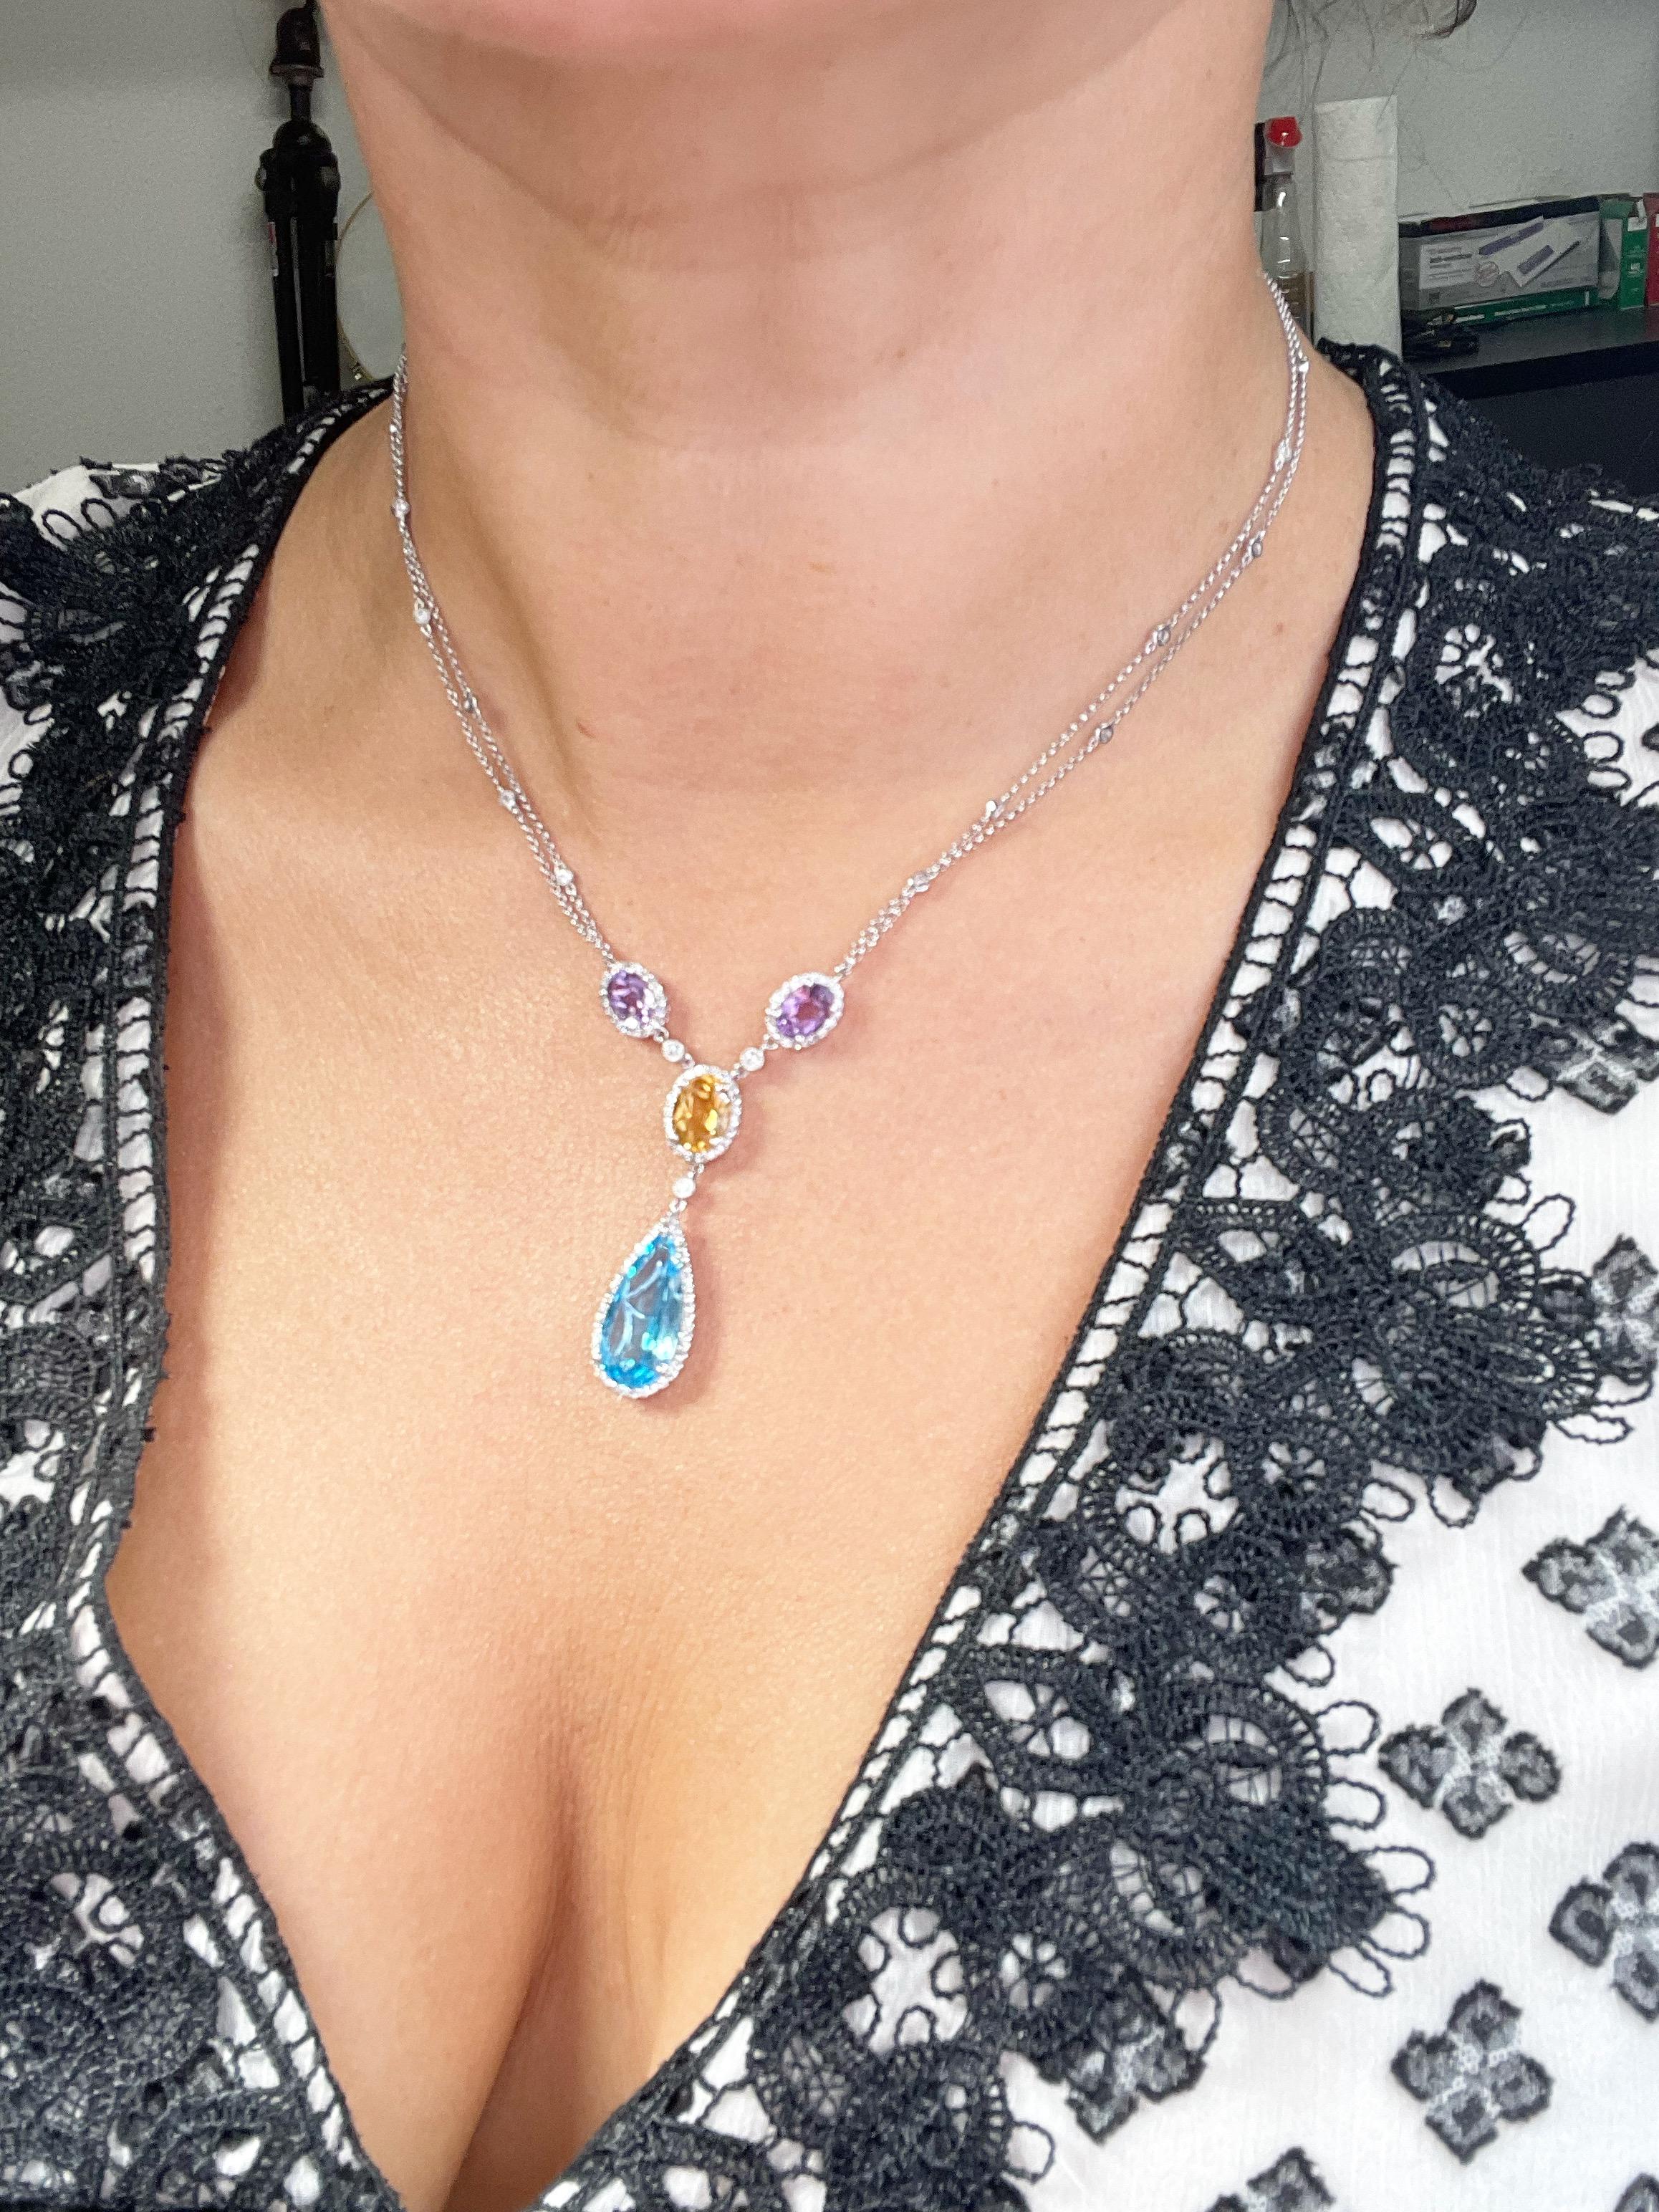 Elegant Y style Lariat necklace made with diamonds, topaz, citrine and amethyst. A beautiful summer necklace in 14KT white gold. The necklace can be worn as cocktail necklace with a black dress as well as a white shirt and jeans for more of a casual